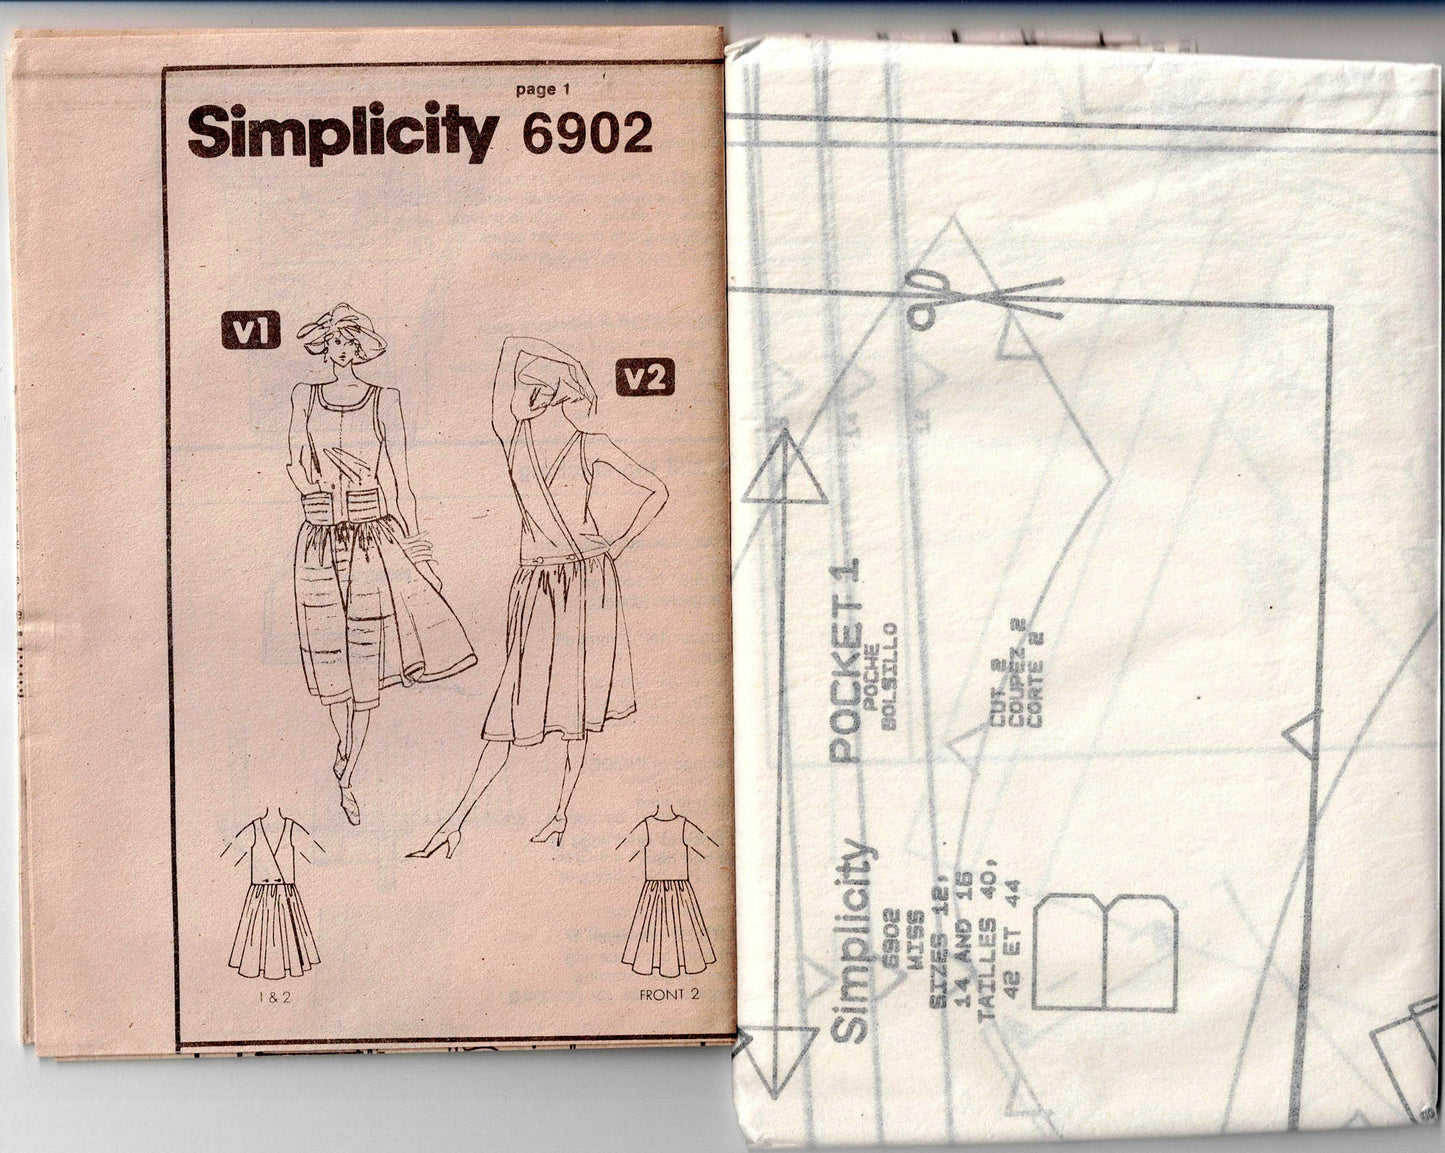 Simplicity 6902 Womens Back Wrap Dress 1980s Vintage Sewing Pattern Size 10 or 12 - 16 UNCUT Factory Folded